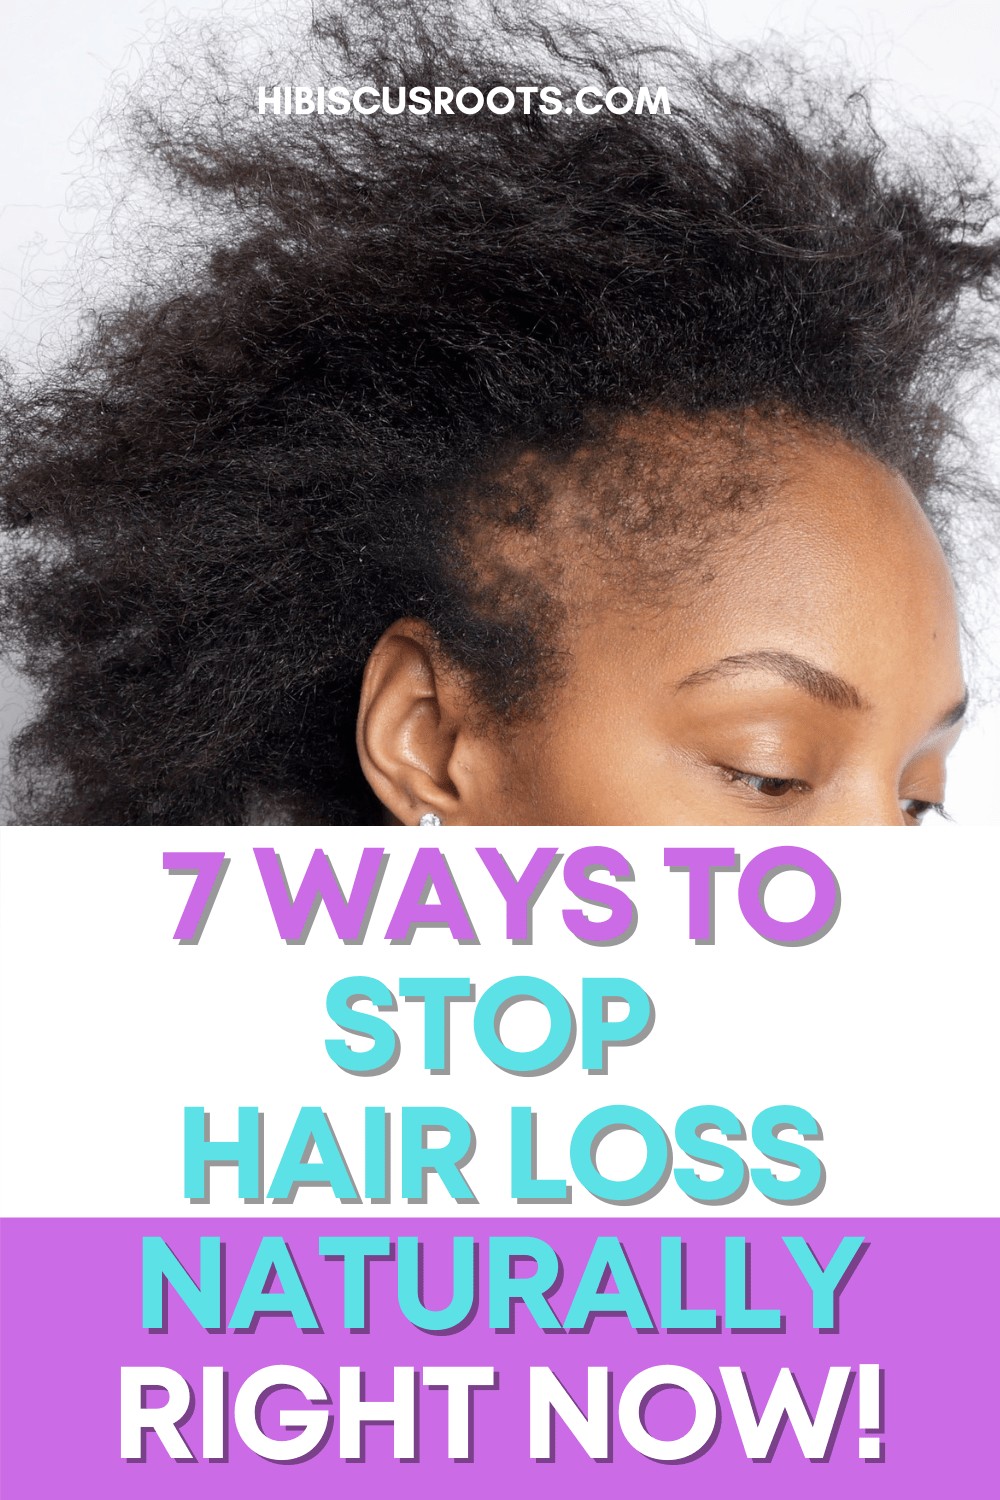 Is Your Hair Falling Out? Here’s What Might be Causing It.